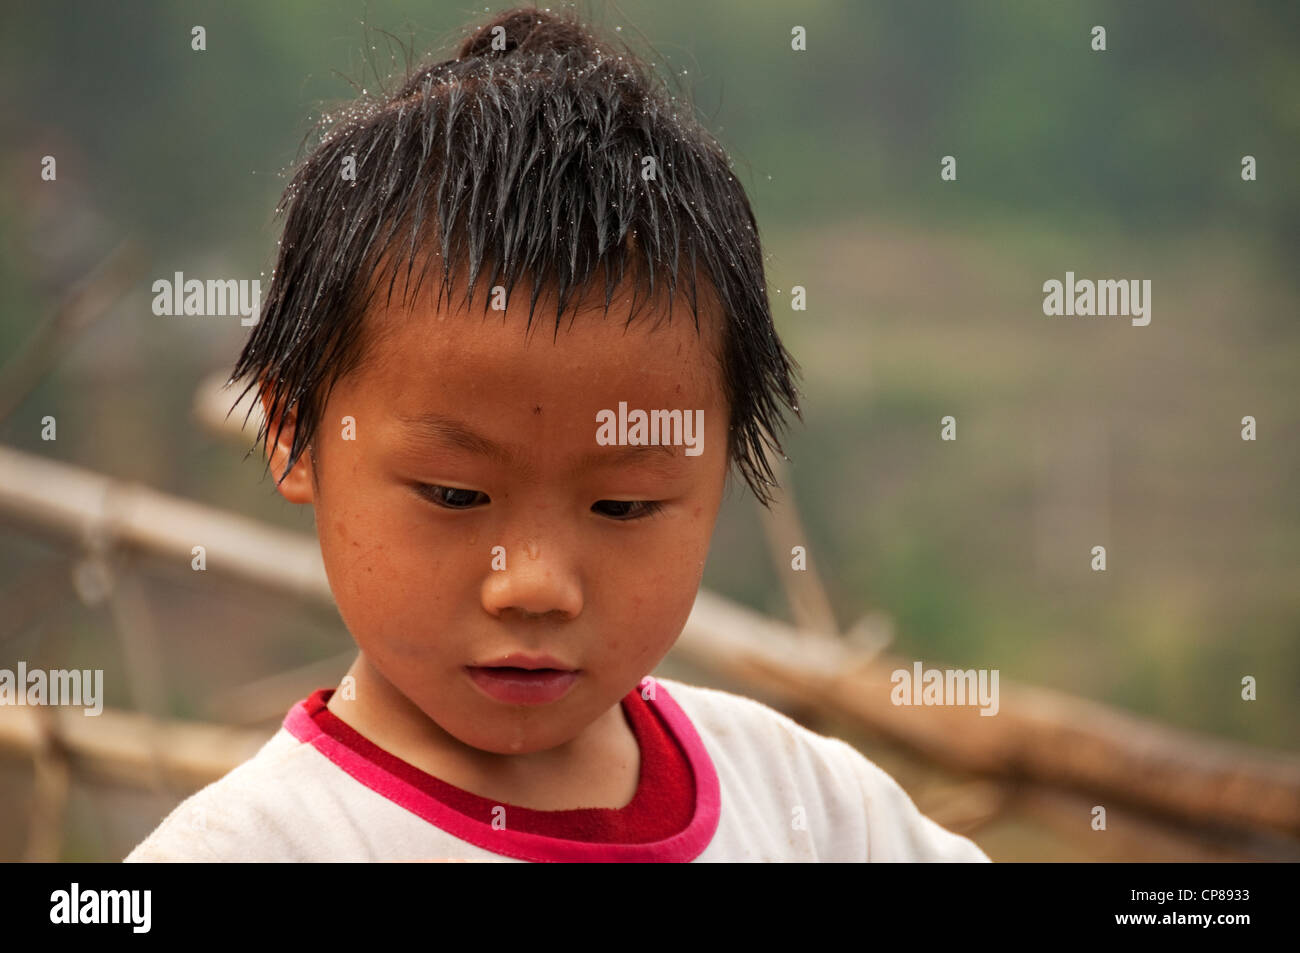 A Basha Miao (Gun Men) young boy with traditional hairstyle, Southern China  Stock Photo - Alamy